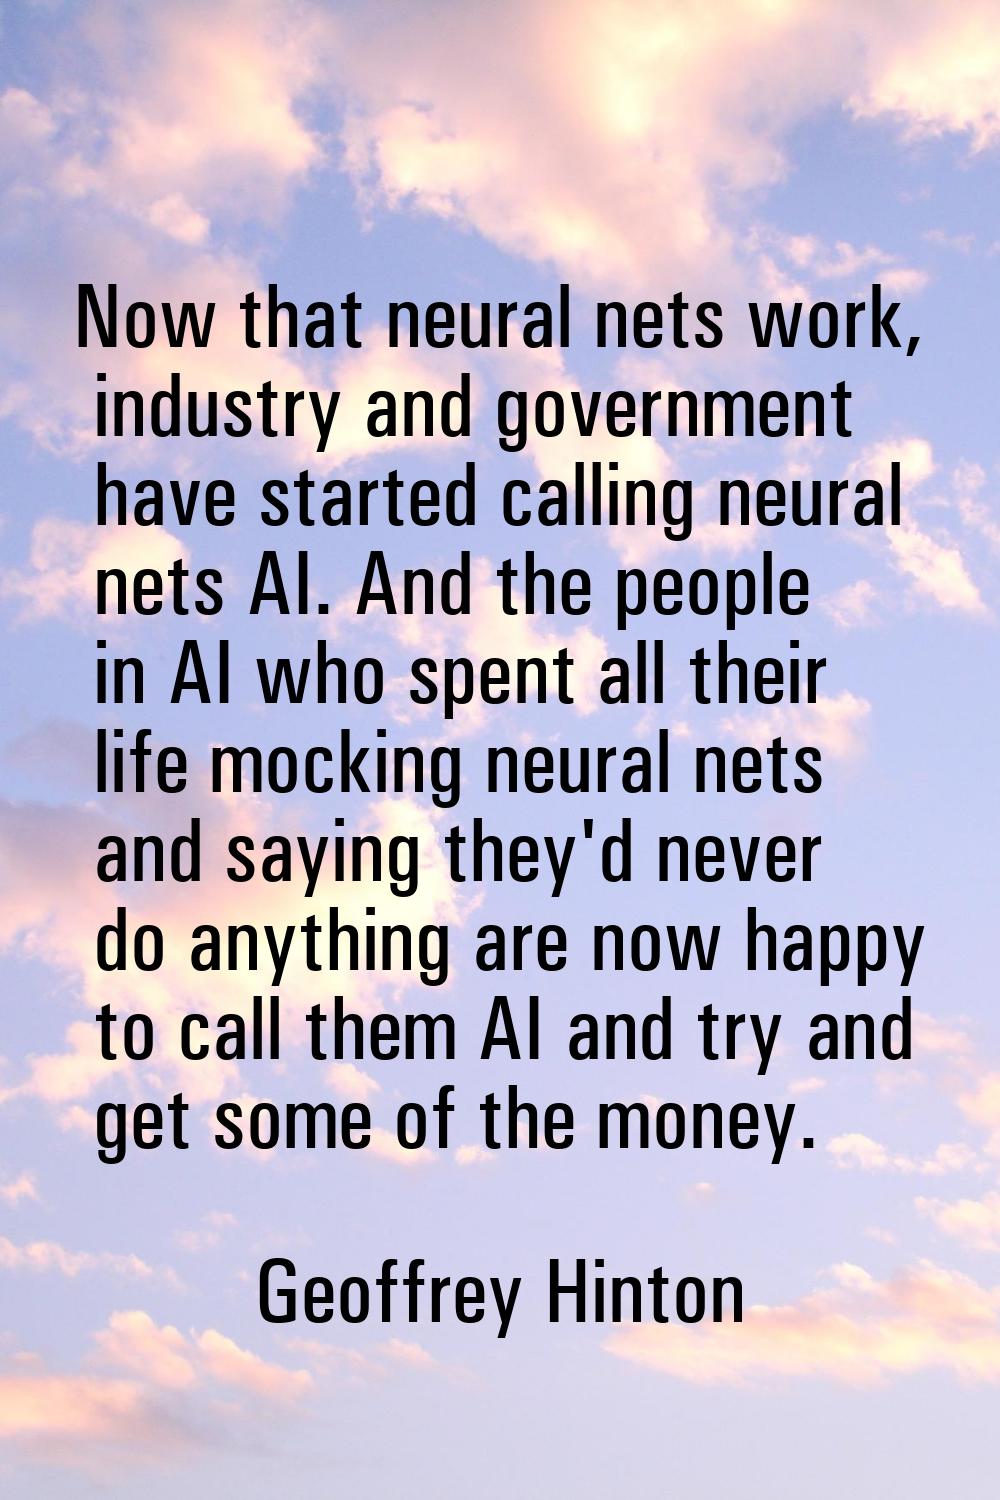 Now that neural nets work, industry and government have started calling neural nets AI. And the peo